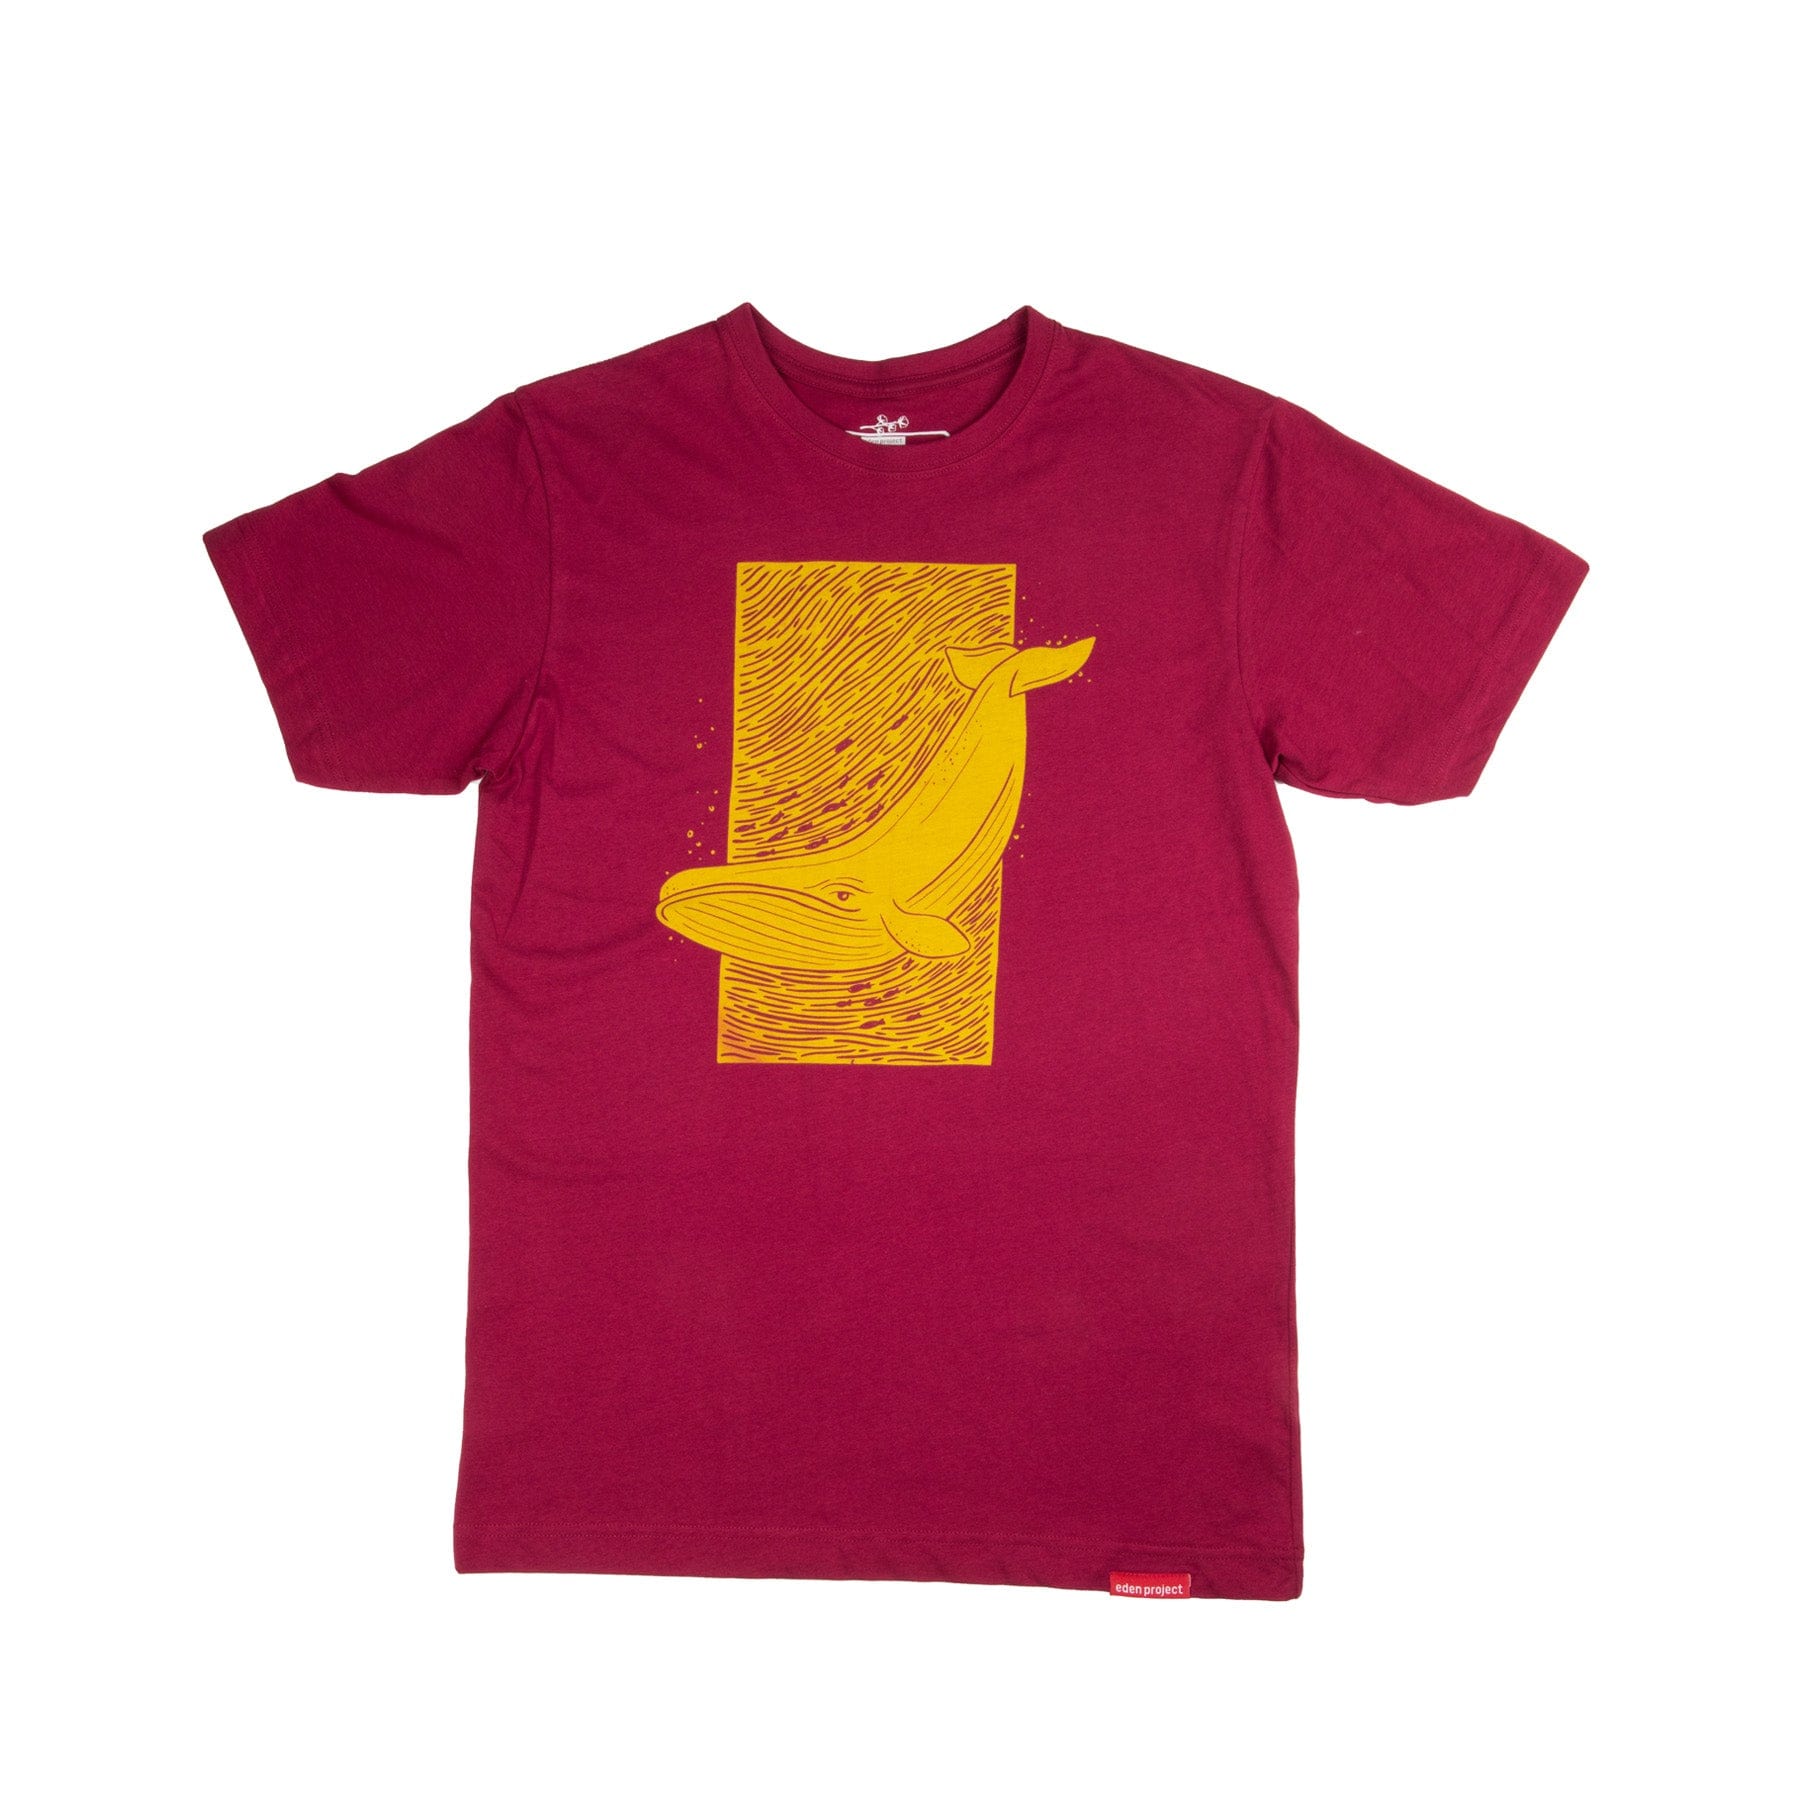 Burgundy t-shirt with yellow whale print design on white background, casual clothing, front view, unisex apparel, fashionable summer wear, cotton fabric, graphic tee design, isolated clothing item